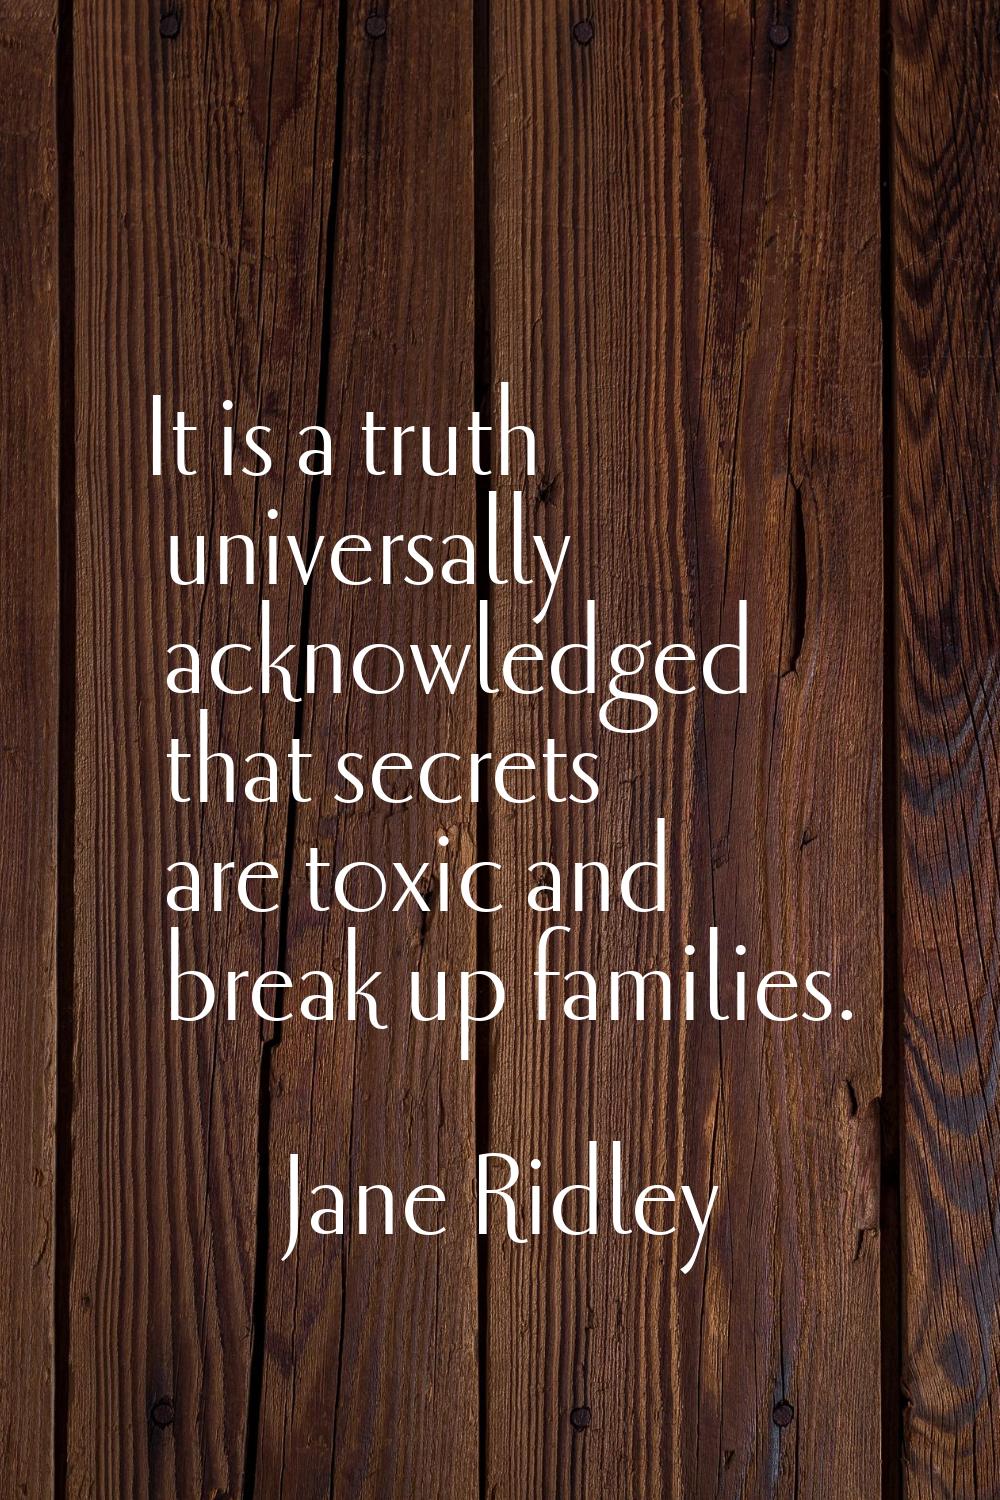 It is a truth universally acknowledged that secrets are toxic and break up families.